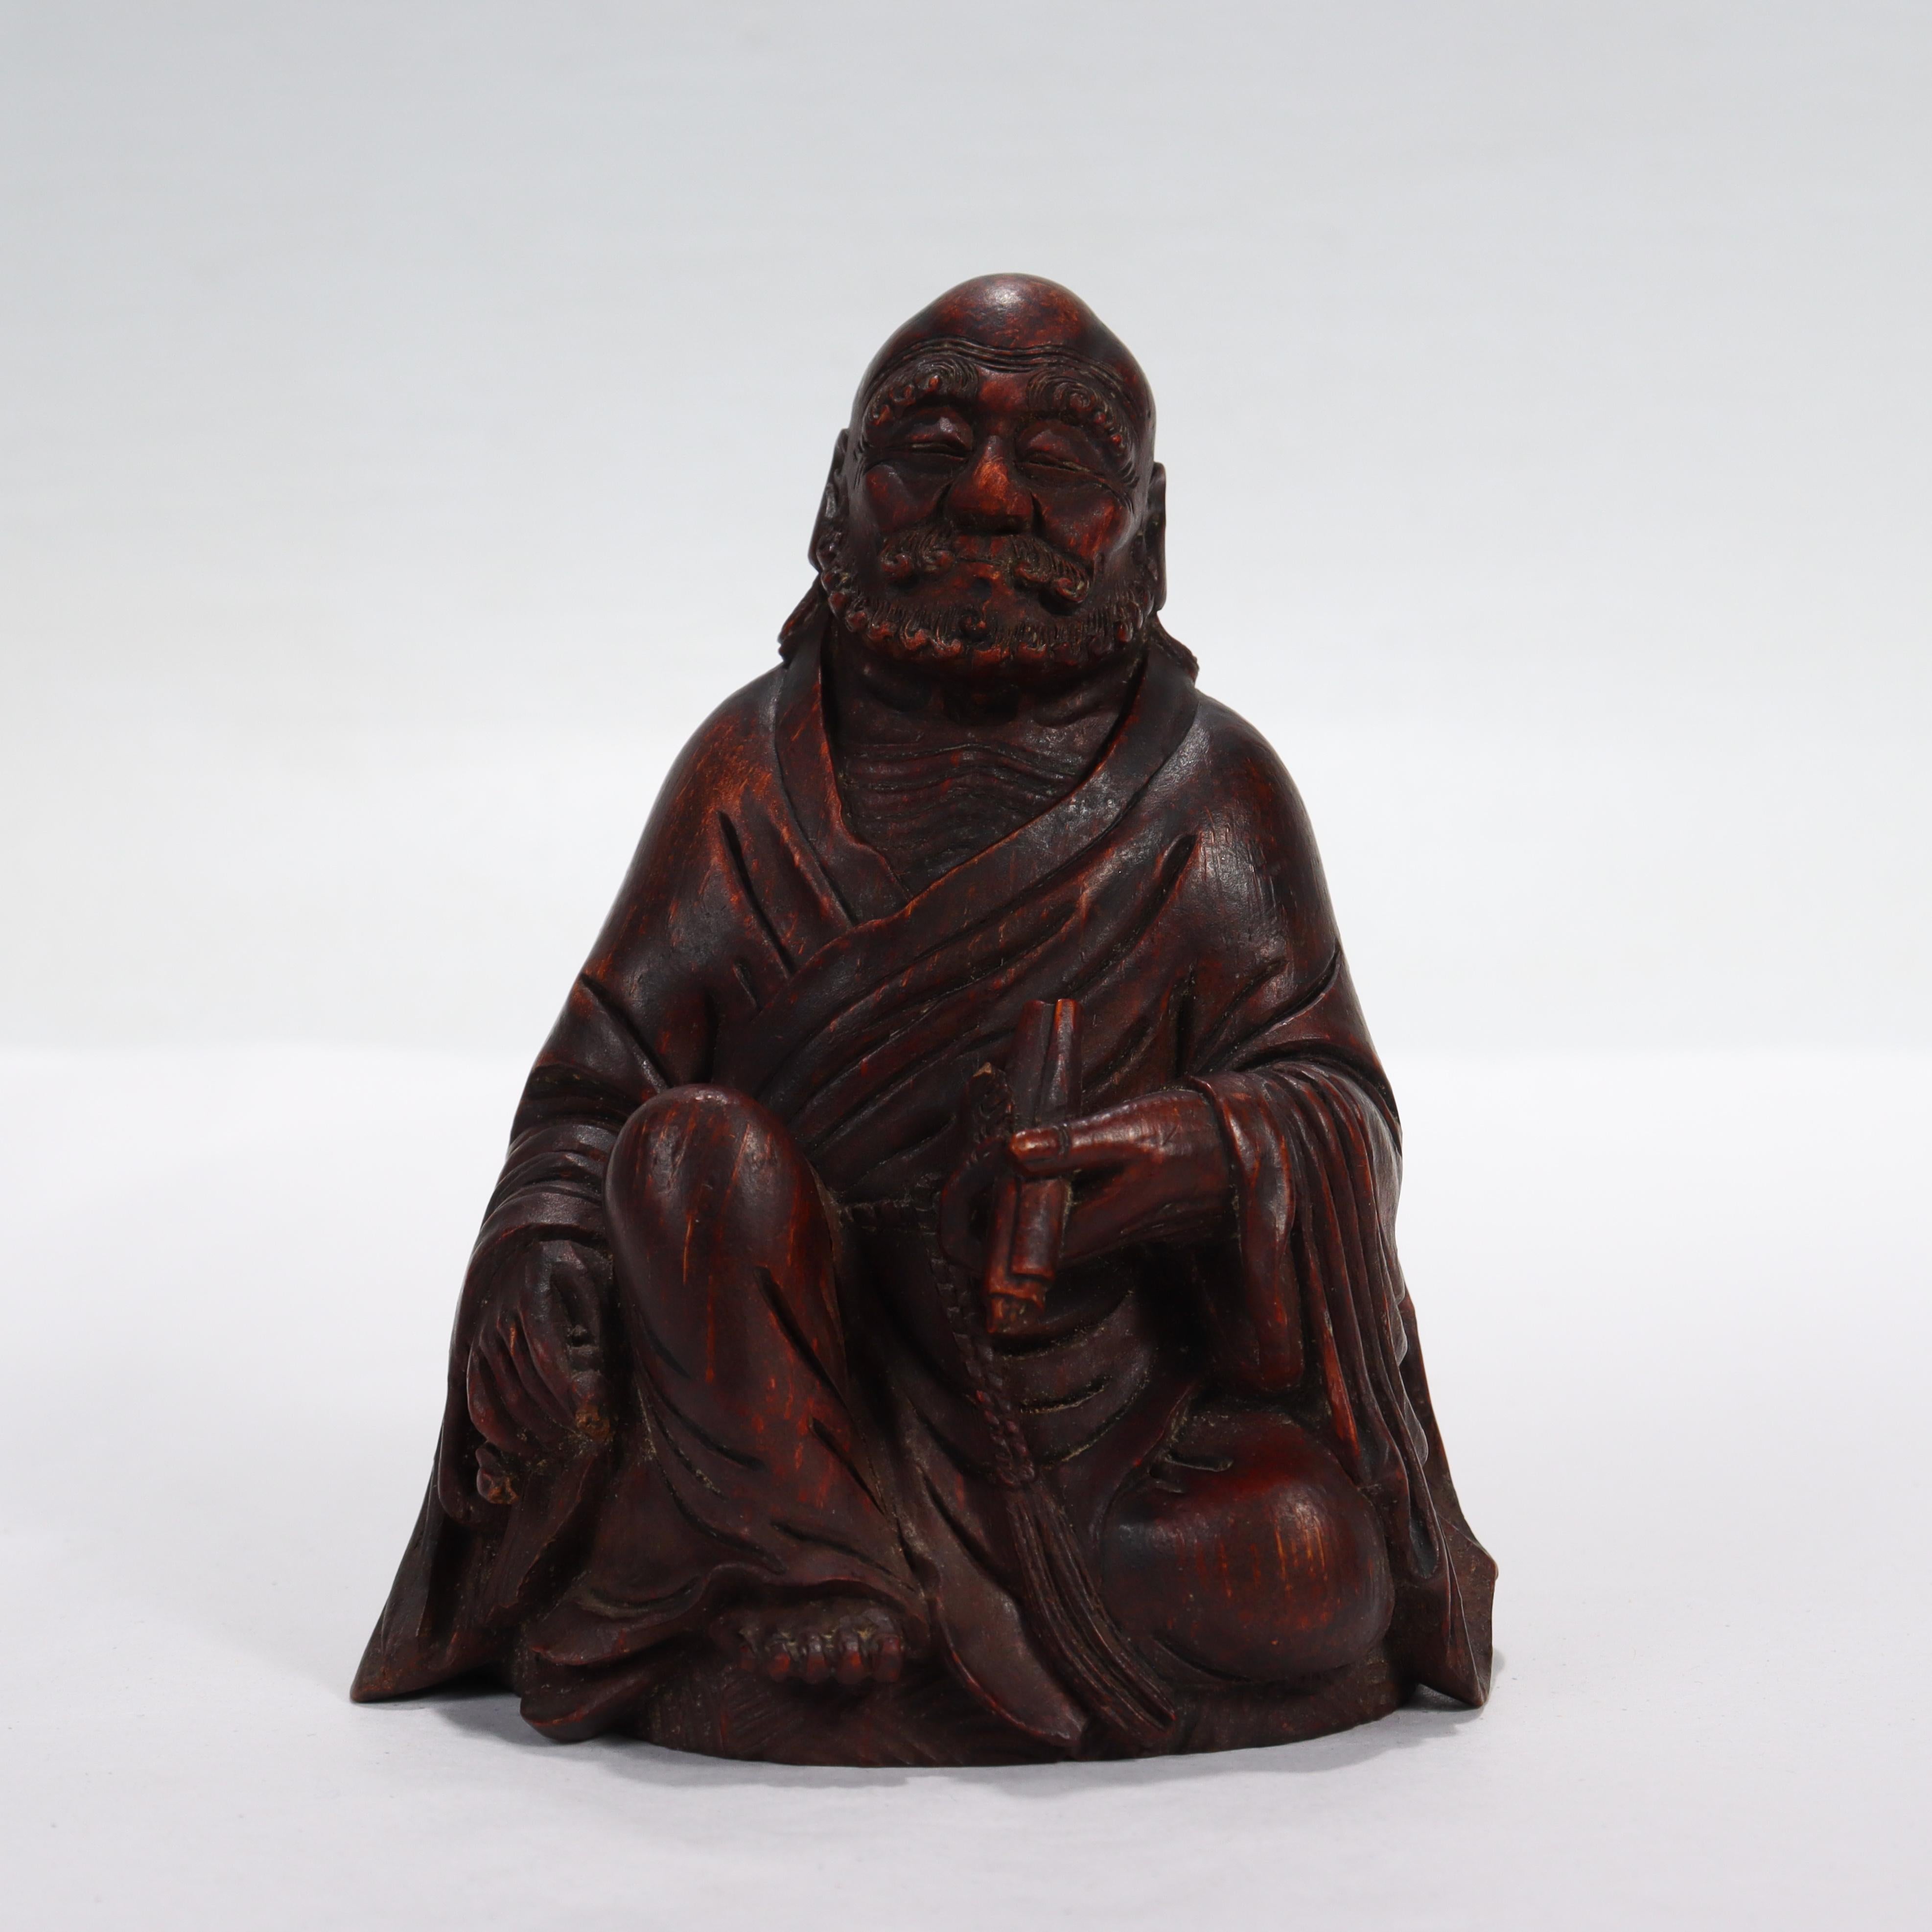 A Japanese wooden figurine of a Buddhist monk.

In the form of a seated Buddhist monk. 

He holds a scroll in his left hand, and a mala/juzu (rosary) in his right hand. Part of the mala has broken off.

Simply a great wooden figurine!

Date:
Late